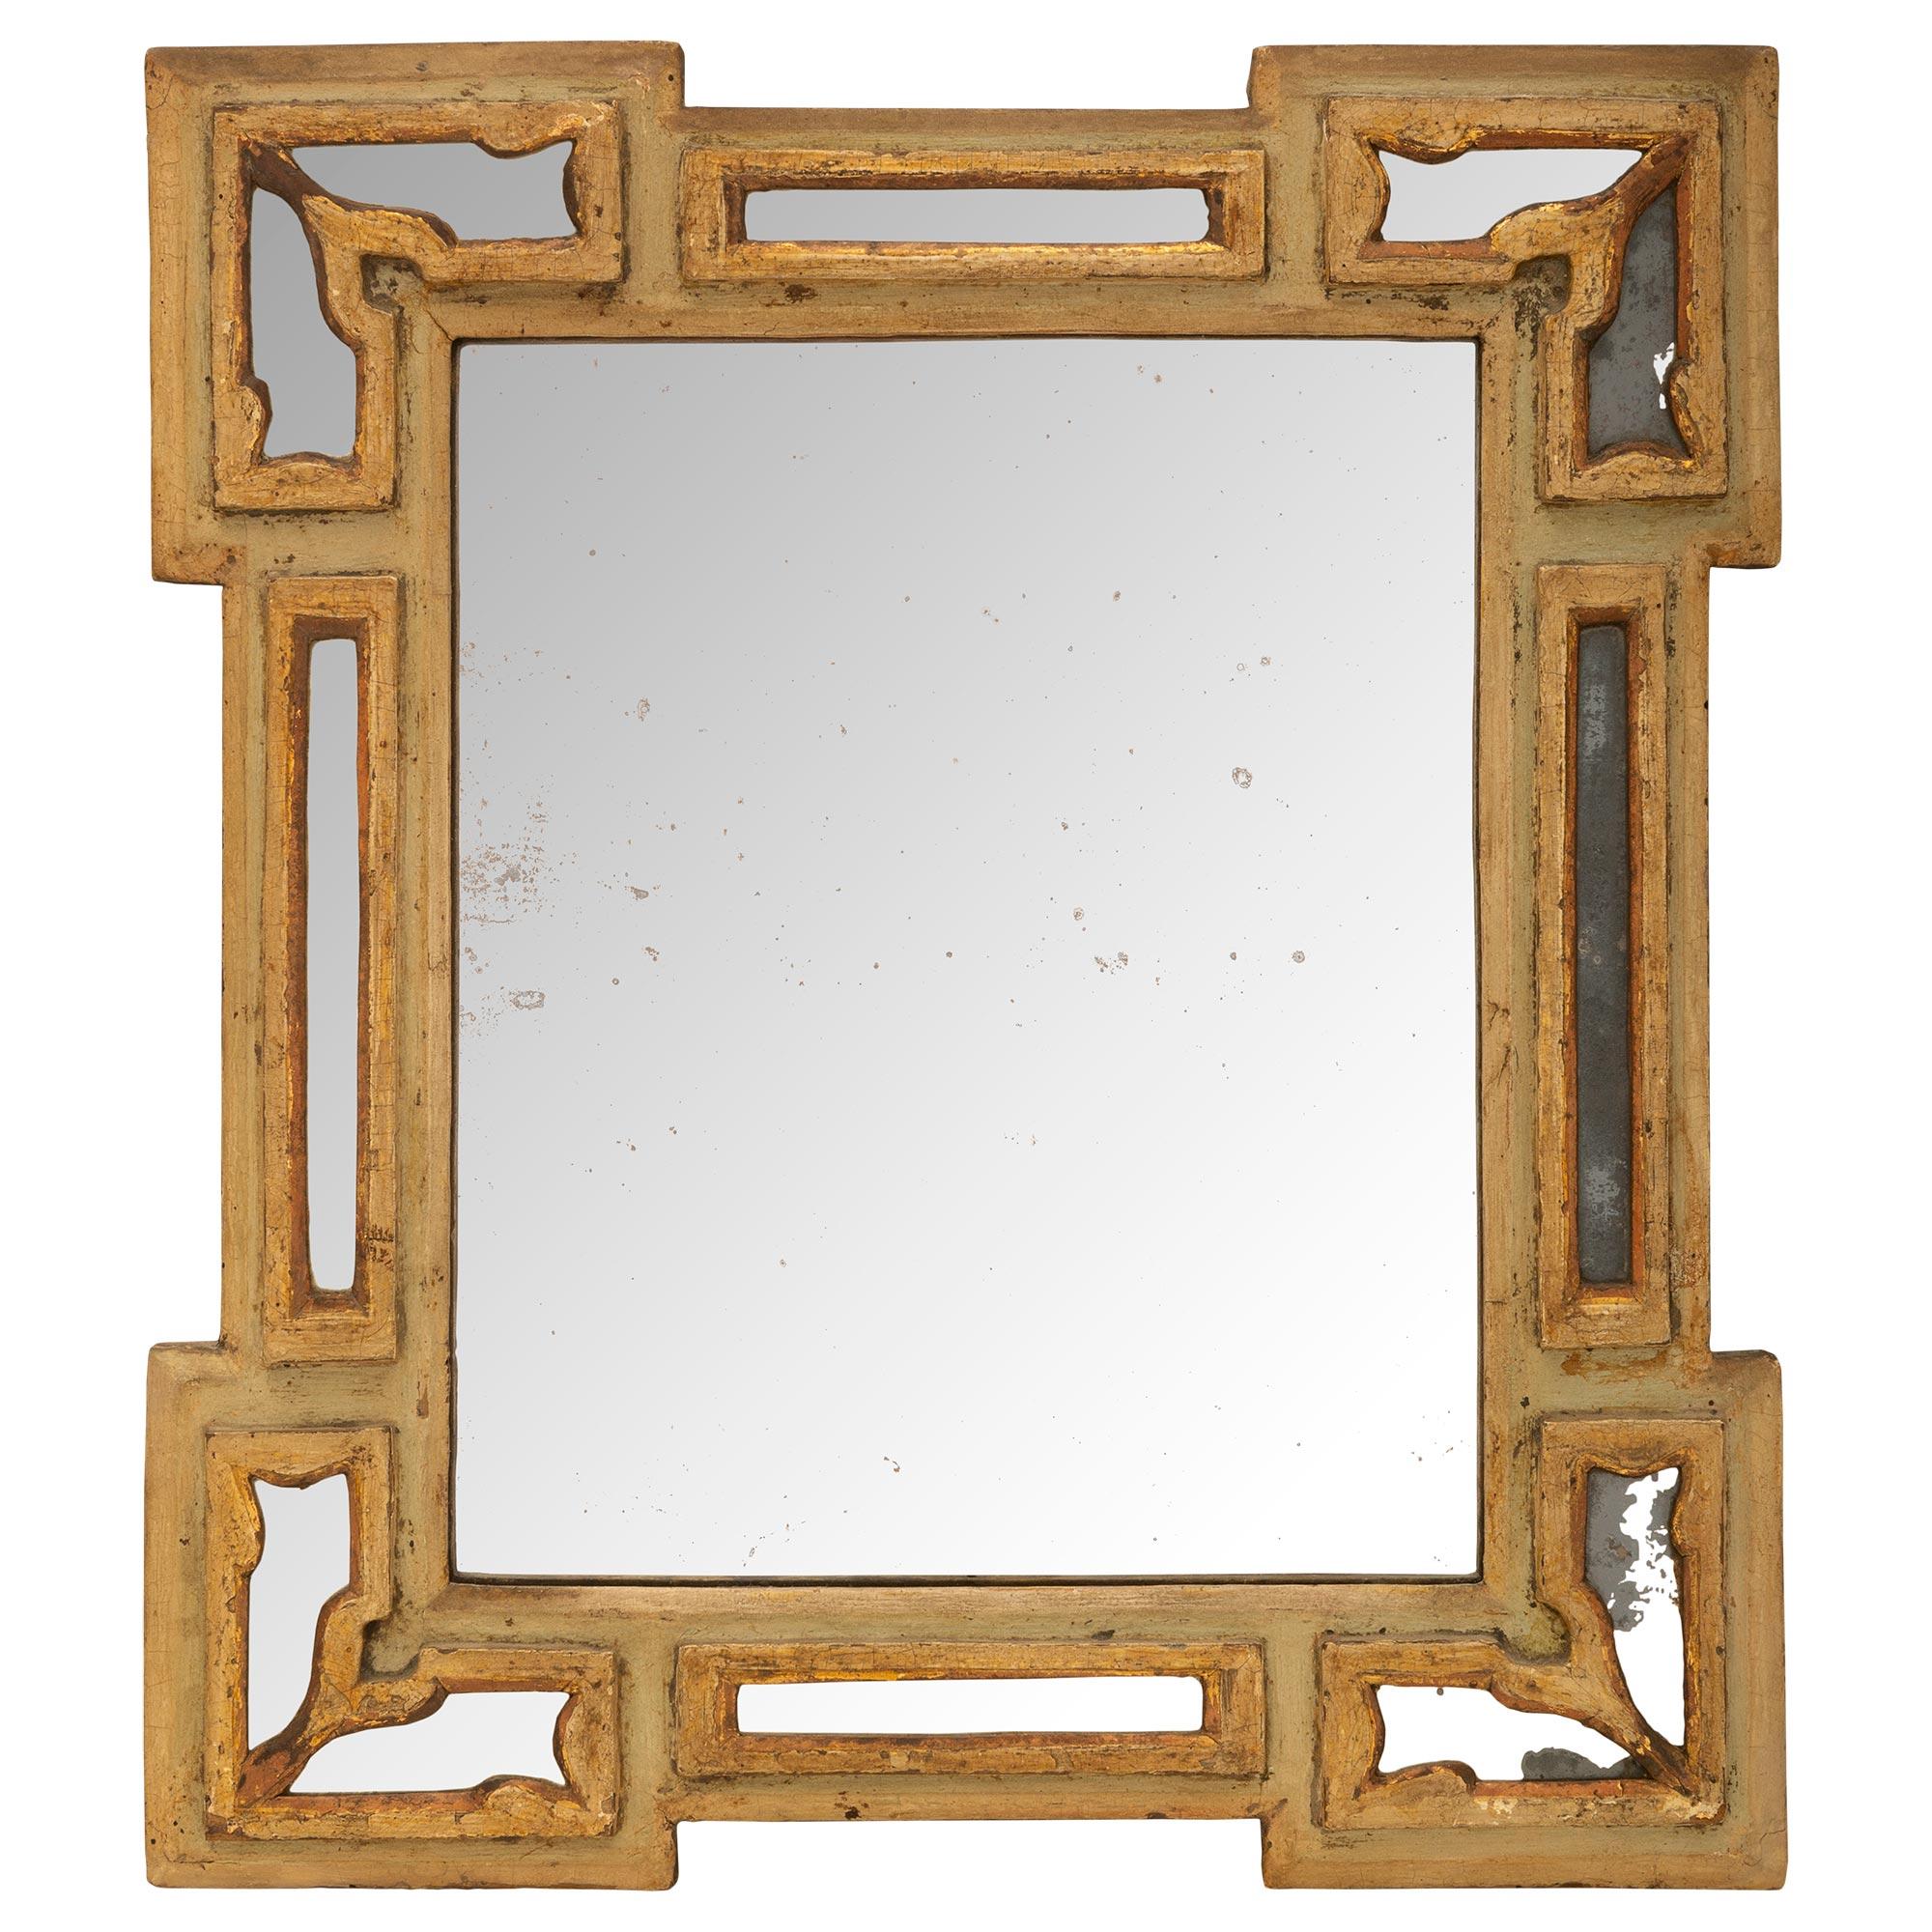 A small scale and charming Italian 18th century Baroque st. double frame patinated wood and gilt mirror. The rectangular mirror with its original patinated off white frame has eight outer gilt panels with fitted mirror plates. All original gilt and